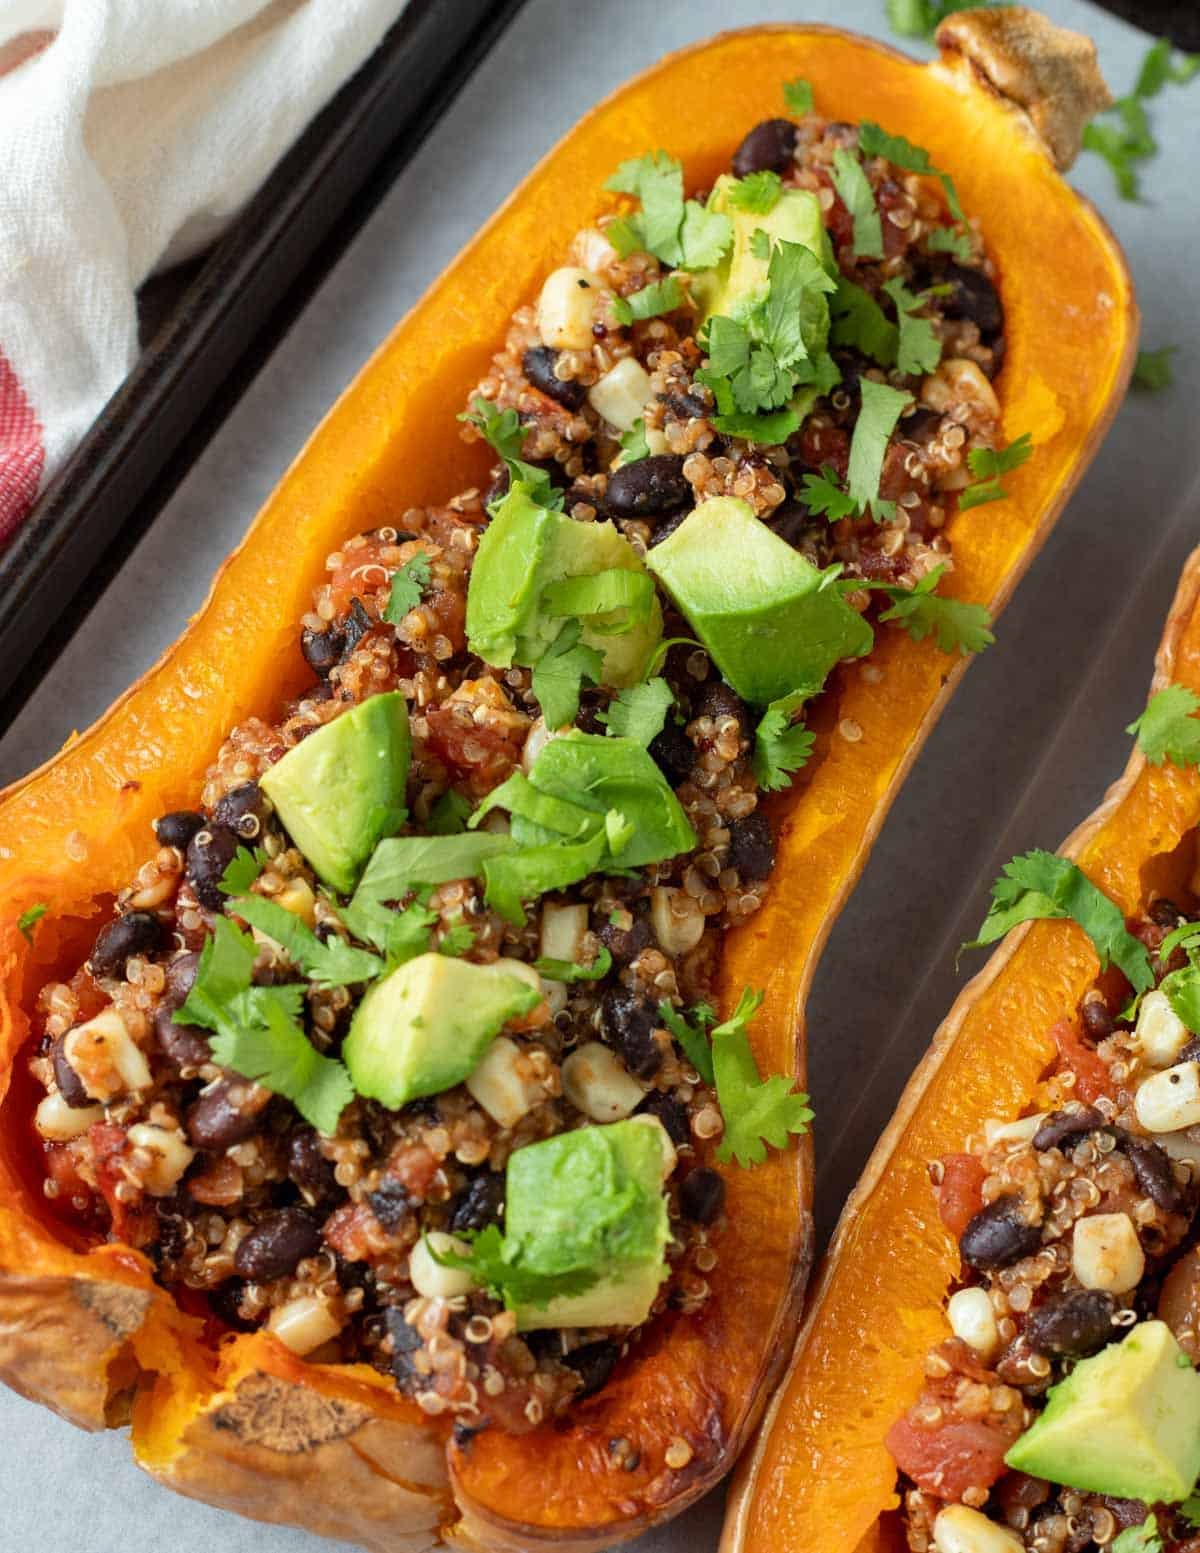 Half a butternut squash stuffed with quinoa and black beans topped with avocado and cilantro.